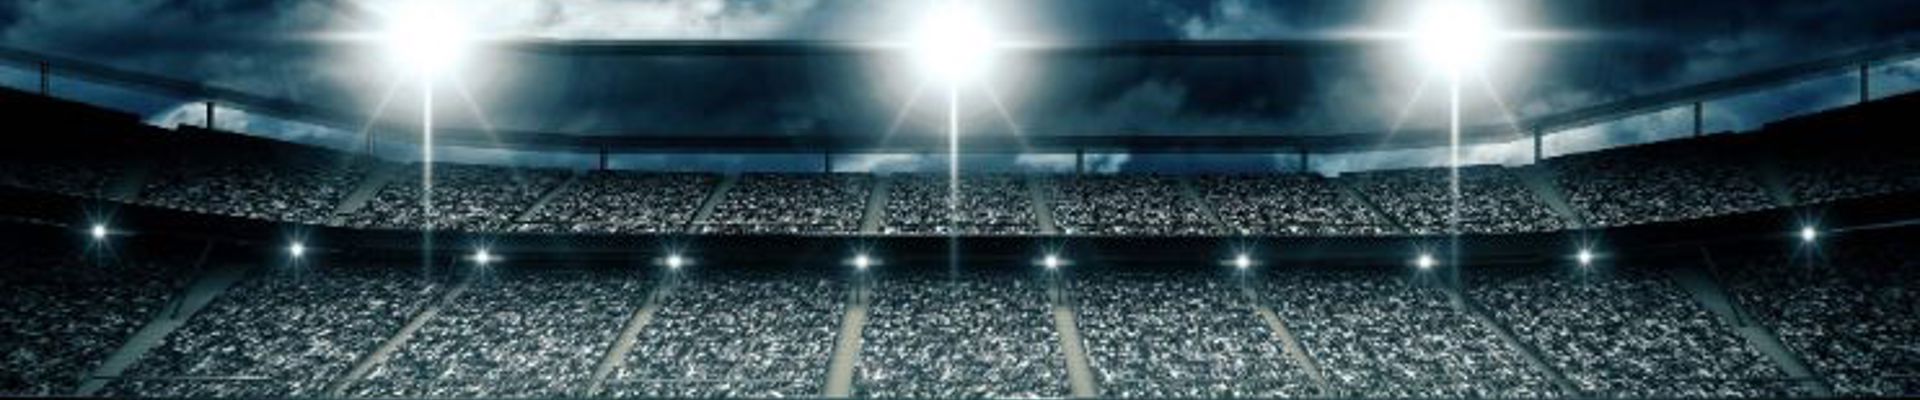 How can sports clubs maximise information from their ticketing data?